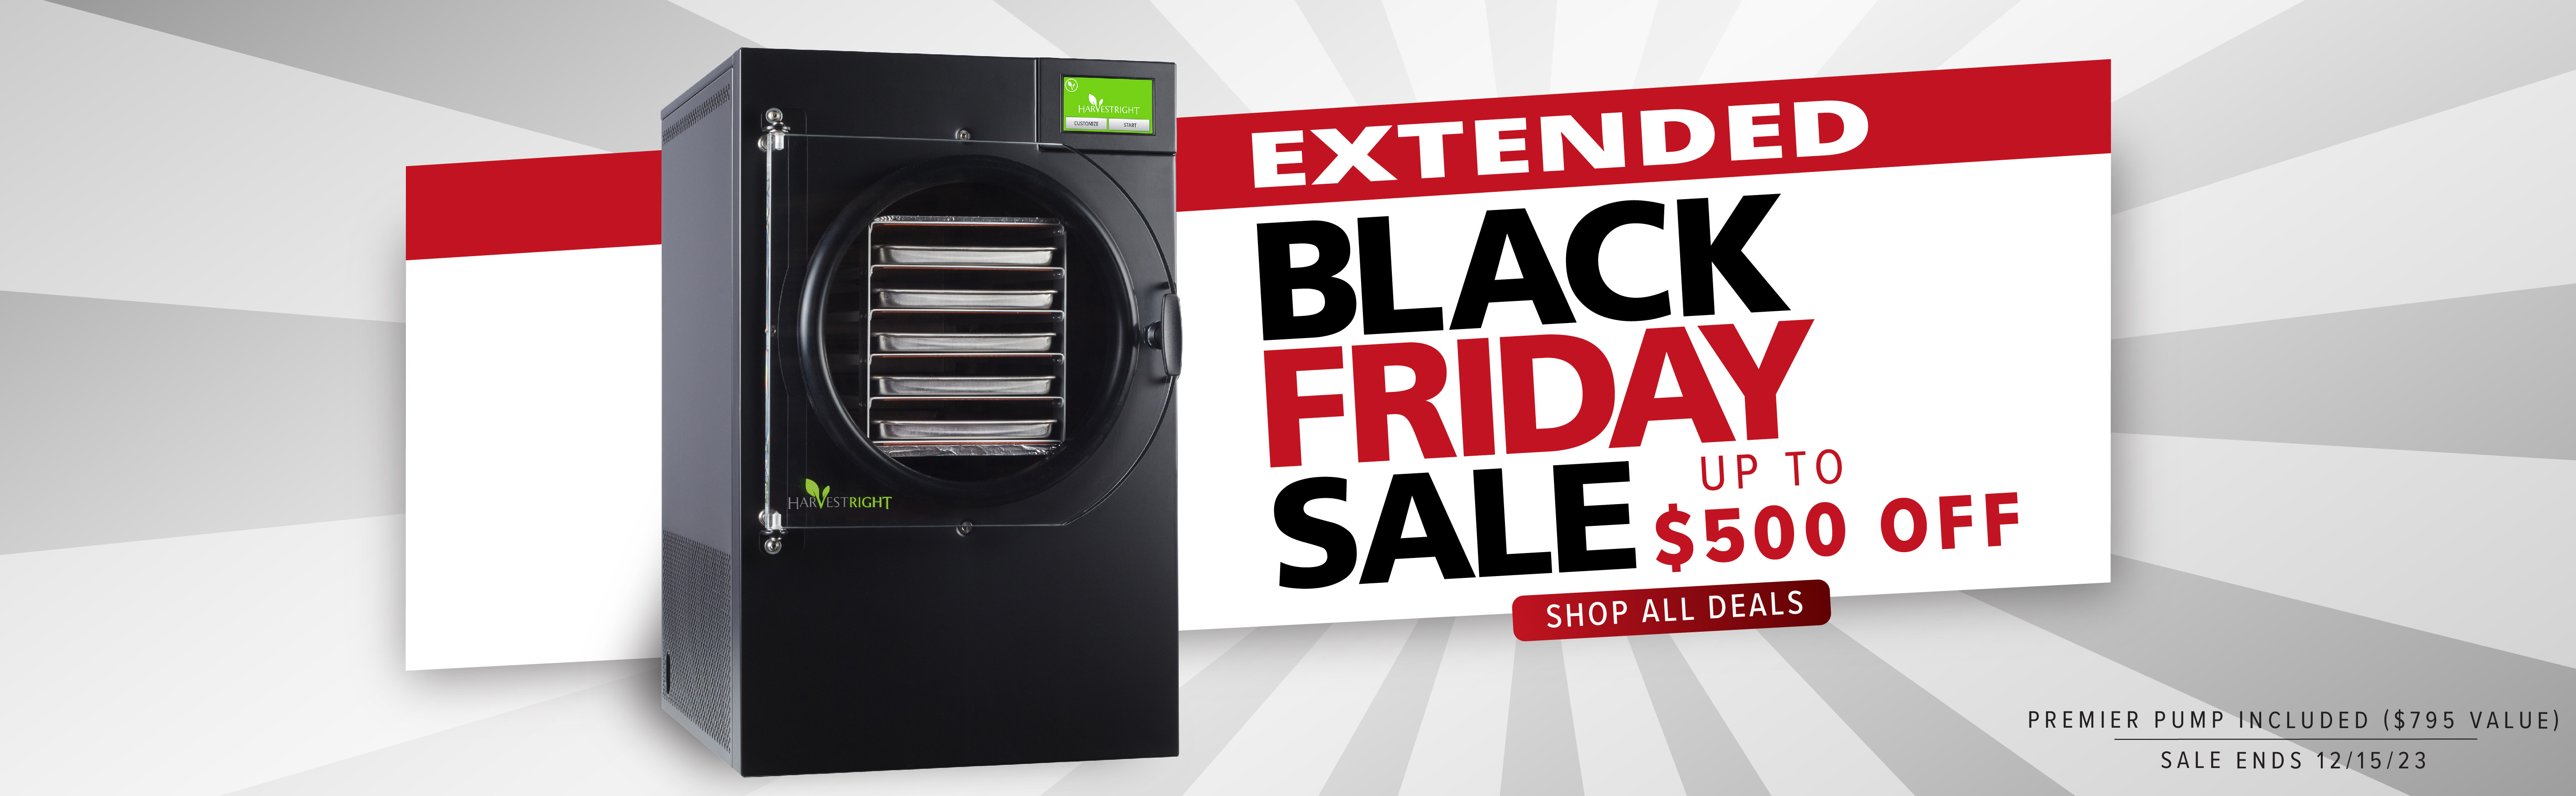 Black Friday_extended Sale to Dec. 15th_up to $500 off_desktop